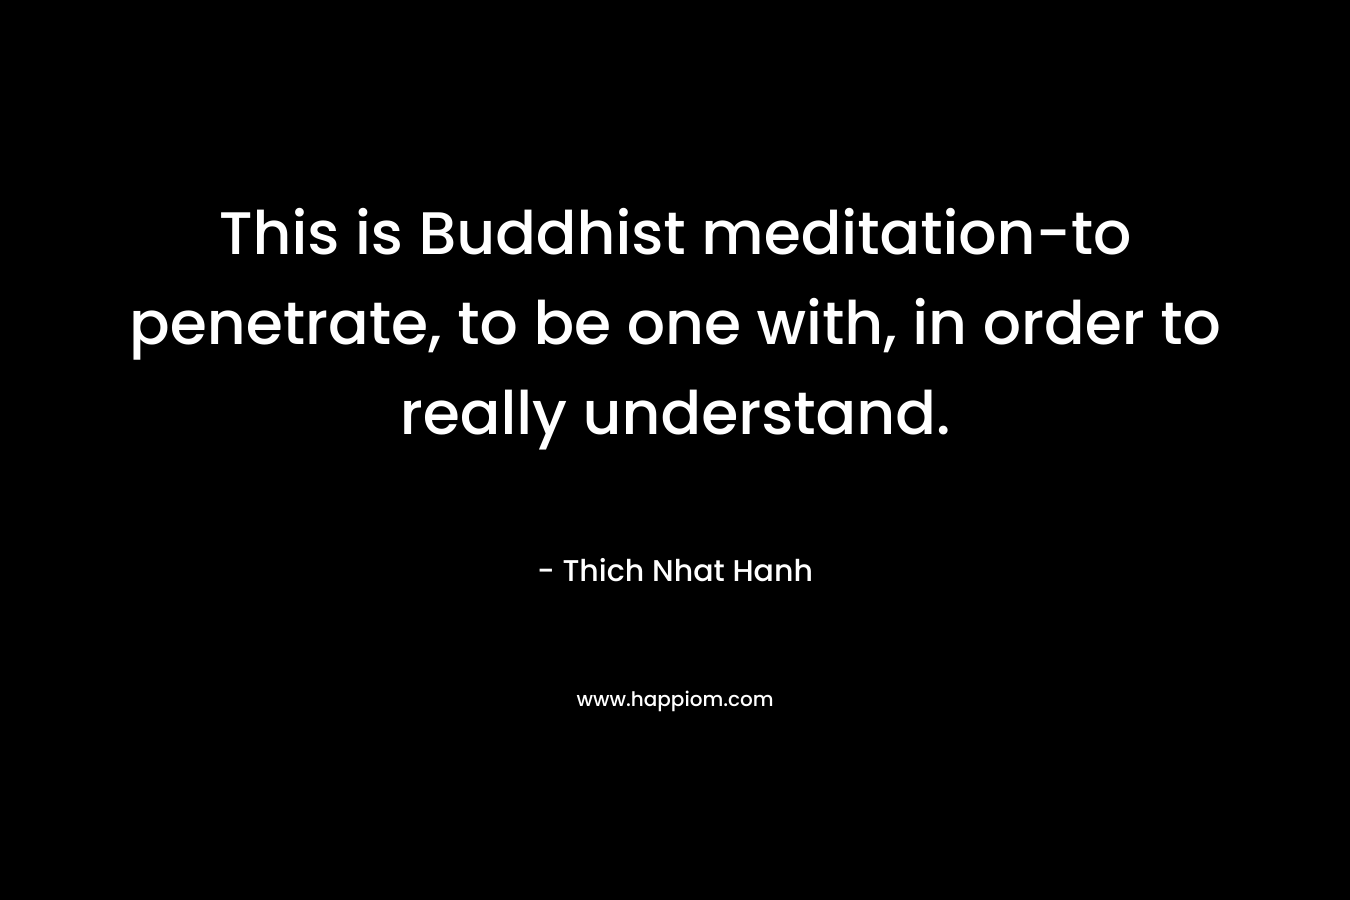 This is Buddhist meditation-to penetrate, to be one with, in order to really understand.